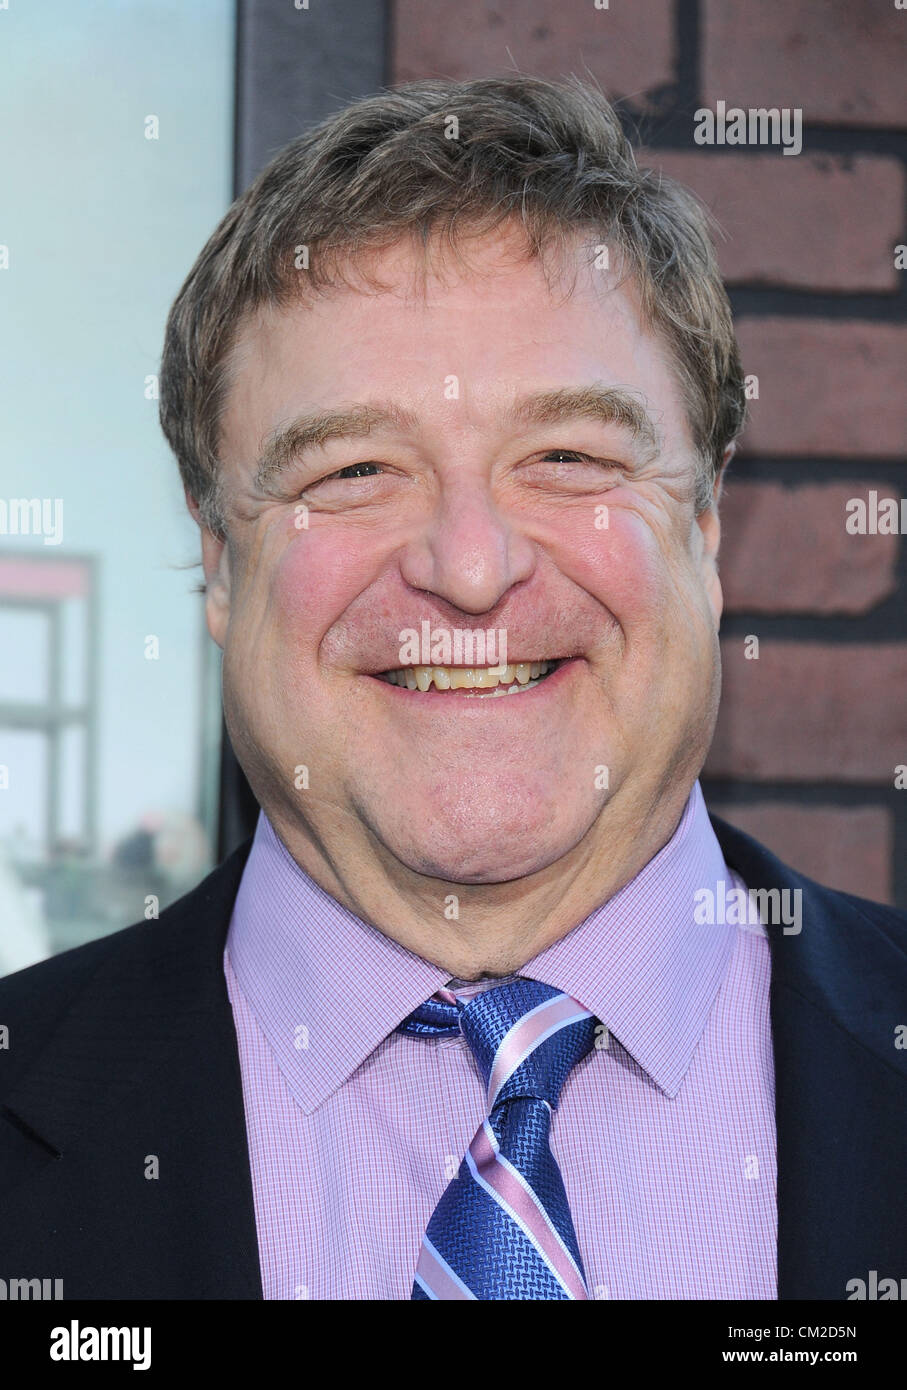 John Goodman at the 'Trouble with the Curve' film premiere in Los Angeles, CA Sept 19th 2012 photo by Sydney Alford Stock Photo